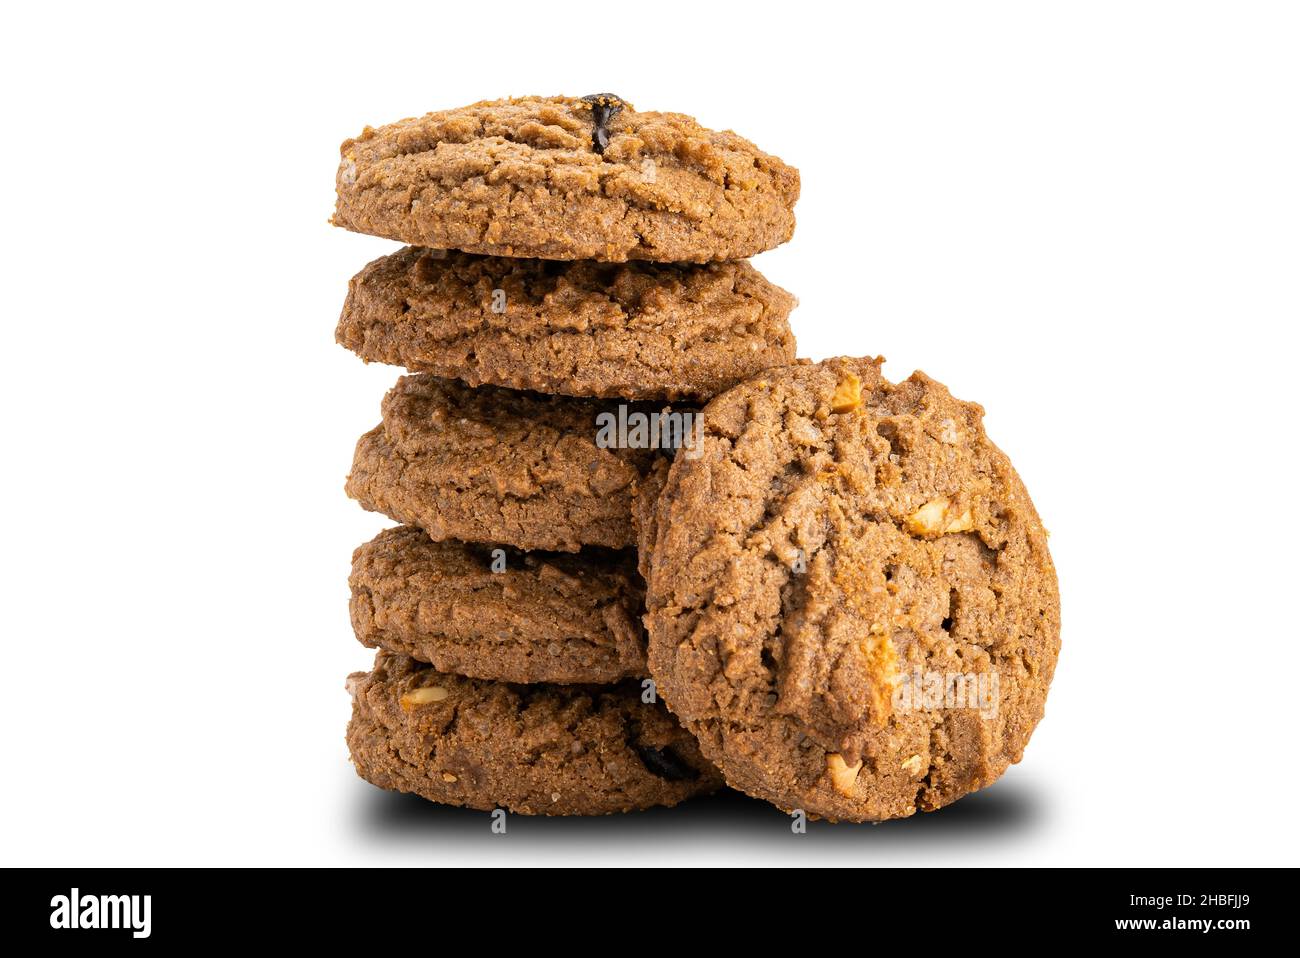 Tower of delicious chocolate chip butter cookies isolated on white background with clipping path. Stock Photo